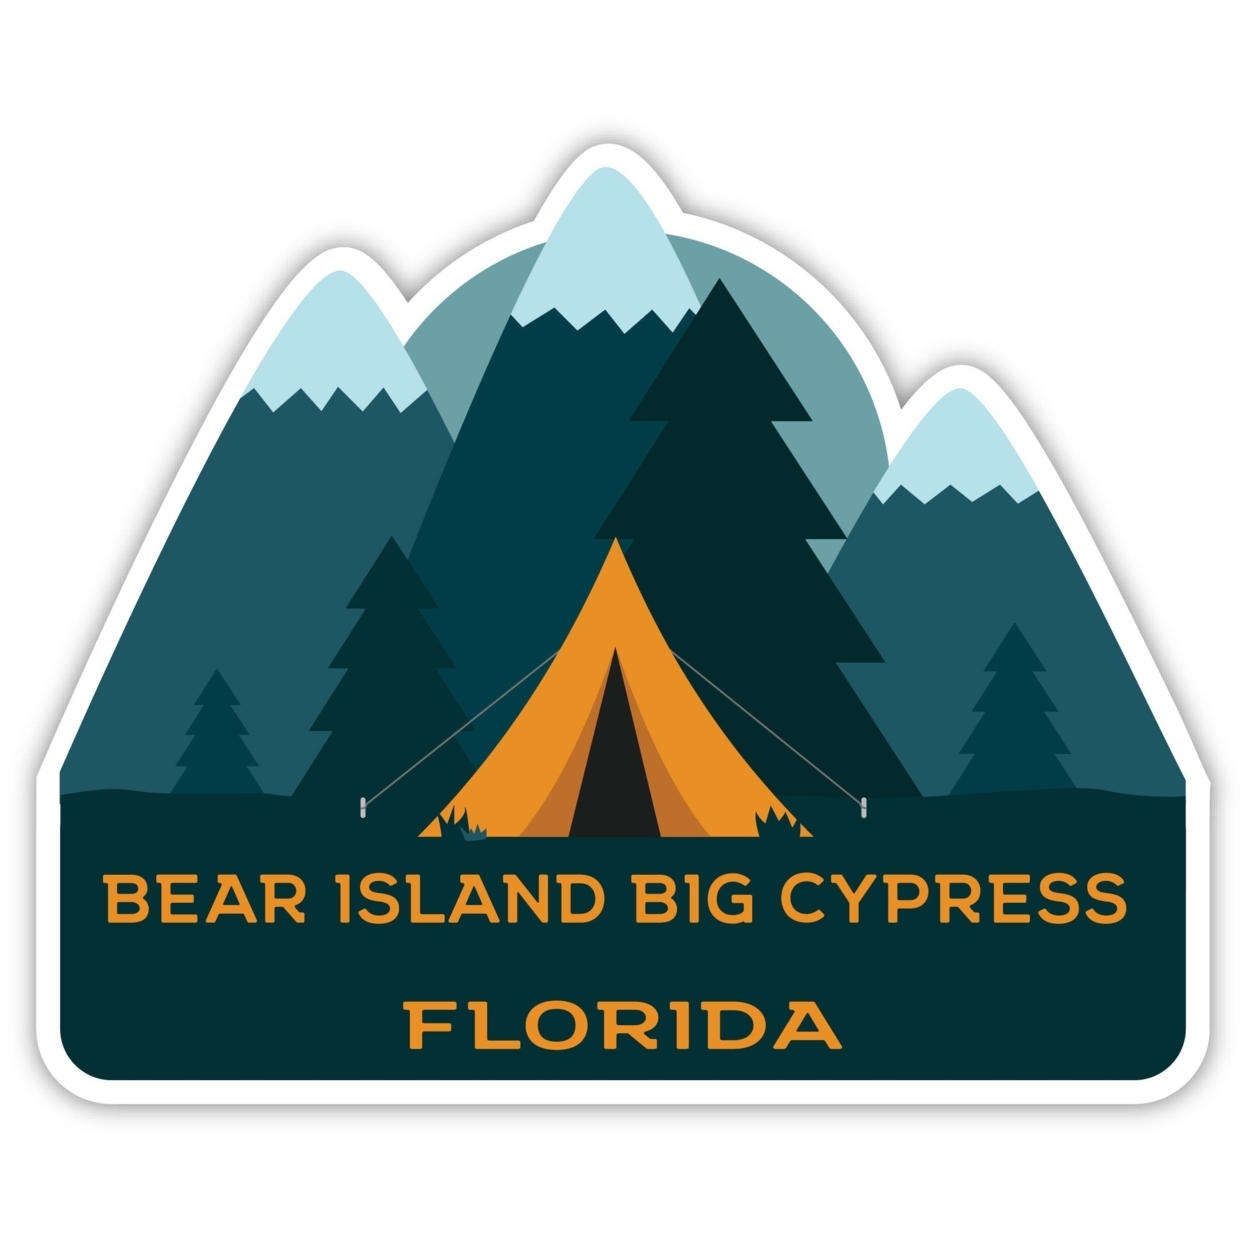 Bear Island Big Cypress Florida Souvenir Decorative Stickers (Choose Theme And Size) - 4-Pack, 2-Inch, Tent